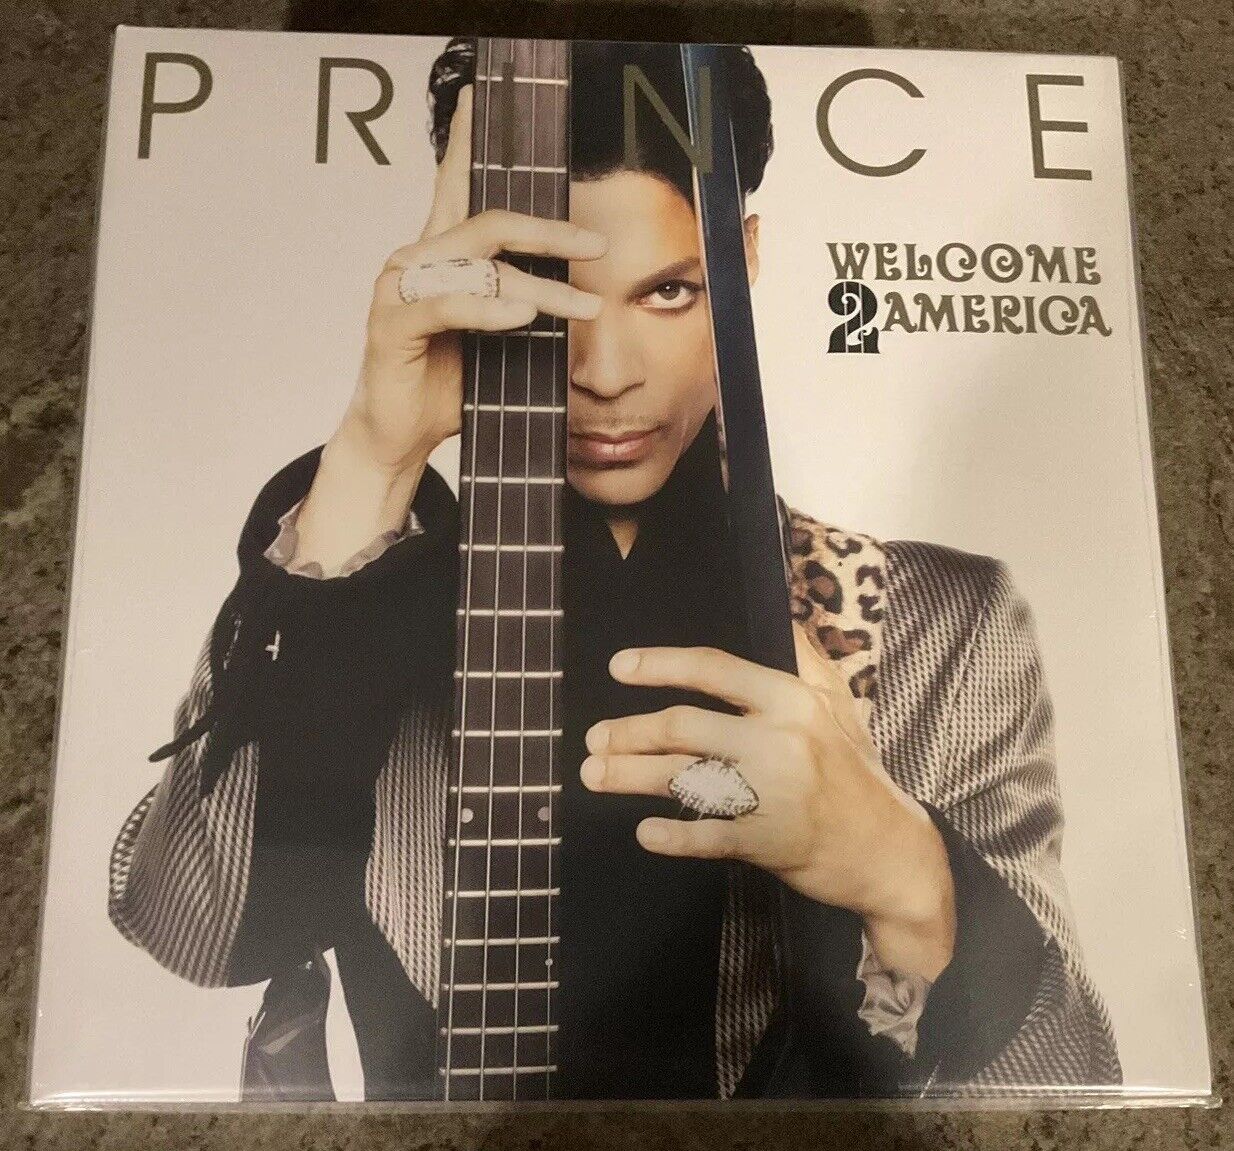 Prince Welcome to America Limited Edition 2 LP Set on Clear Vinyl